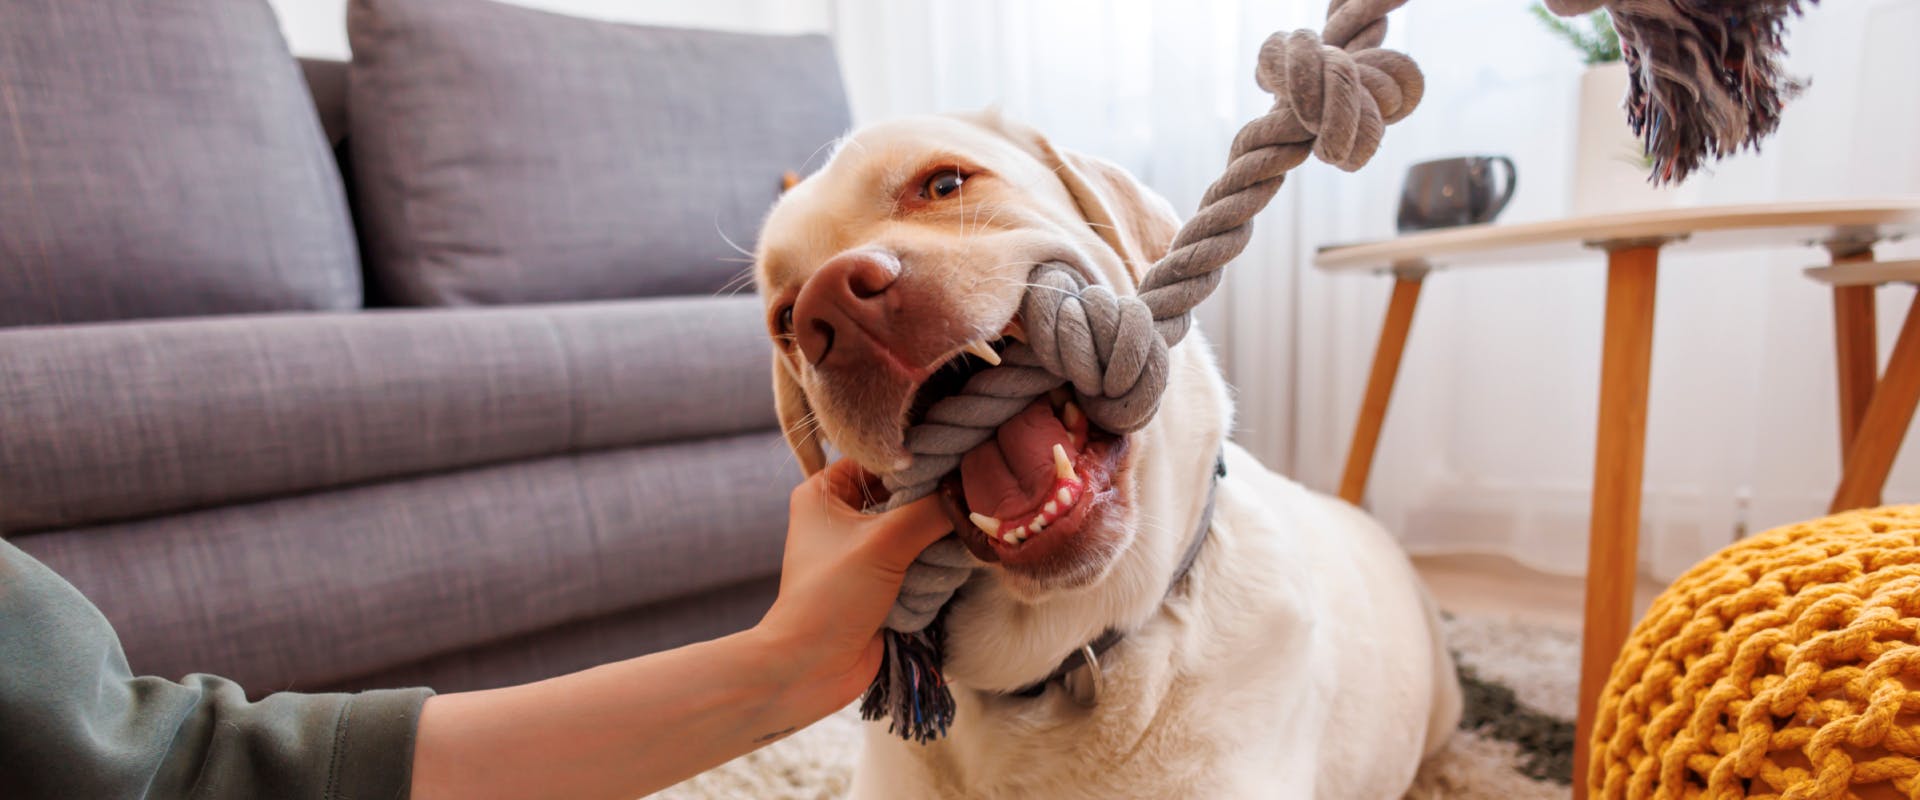 dog puzzles over how to wrestle this dog toy from a dog owner